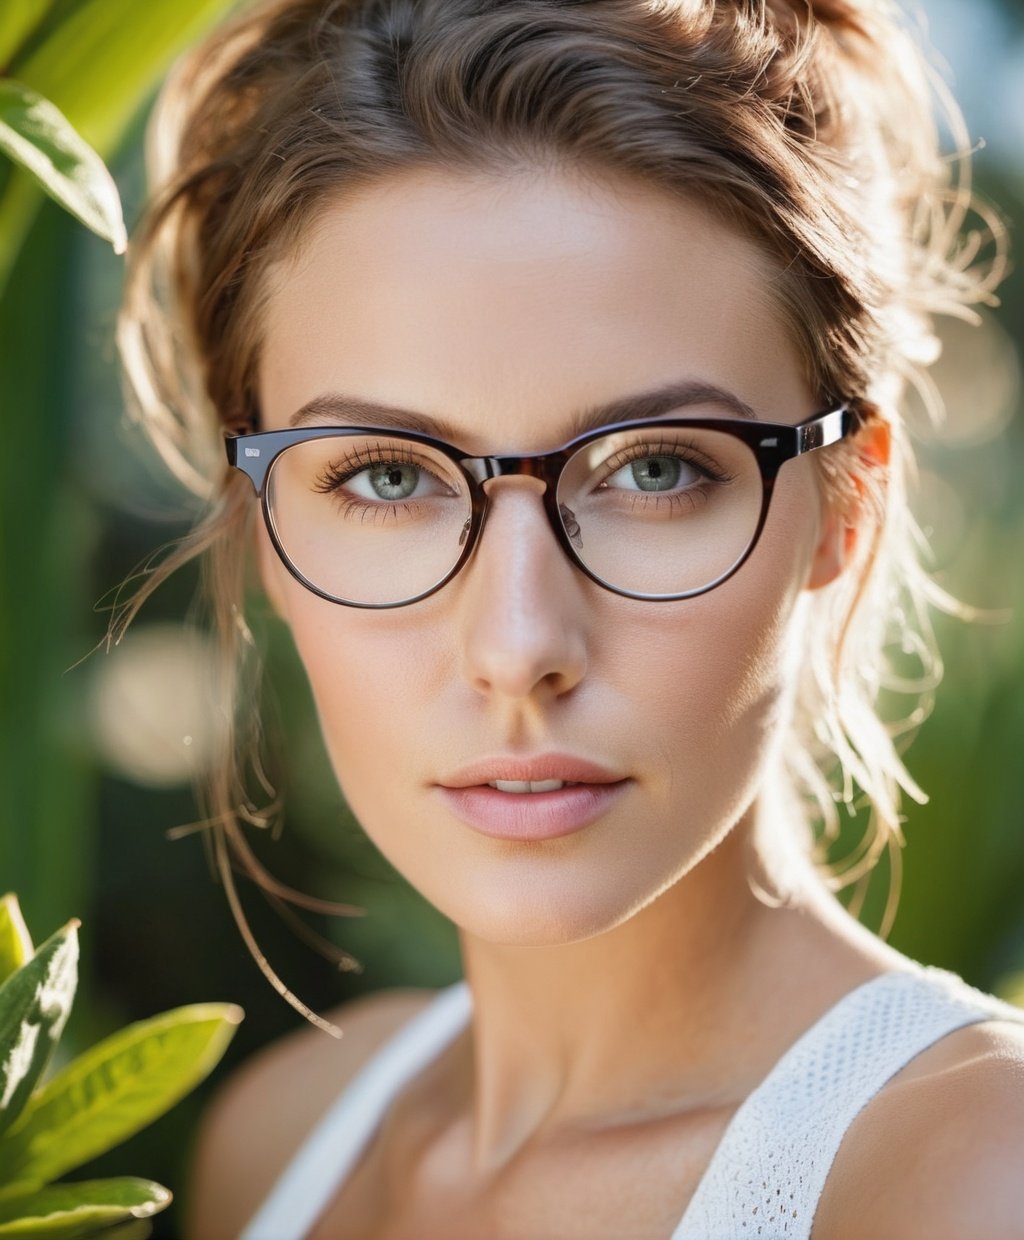 Woman, beautiful garden, glasses, showing skin, soft symmetric facial features, close up portrait, young, shot on sony a1, 85mm F/1. 4 ISO 100, medium format, 45 megapixel, flash lighting, natural sun lighting